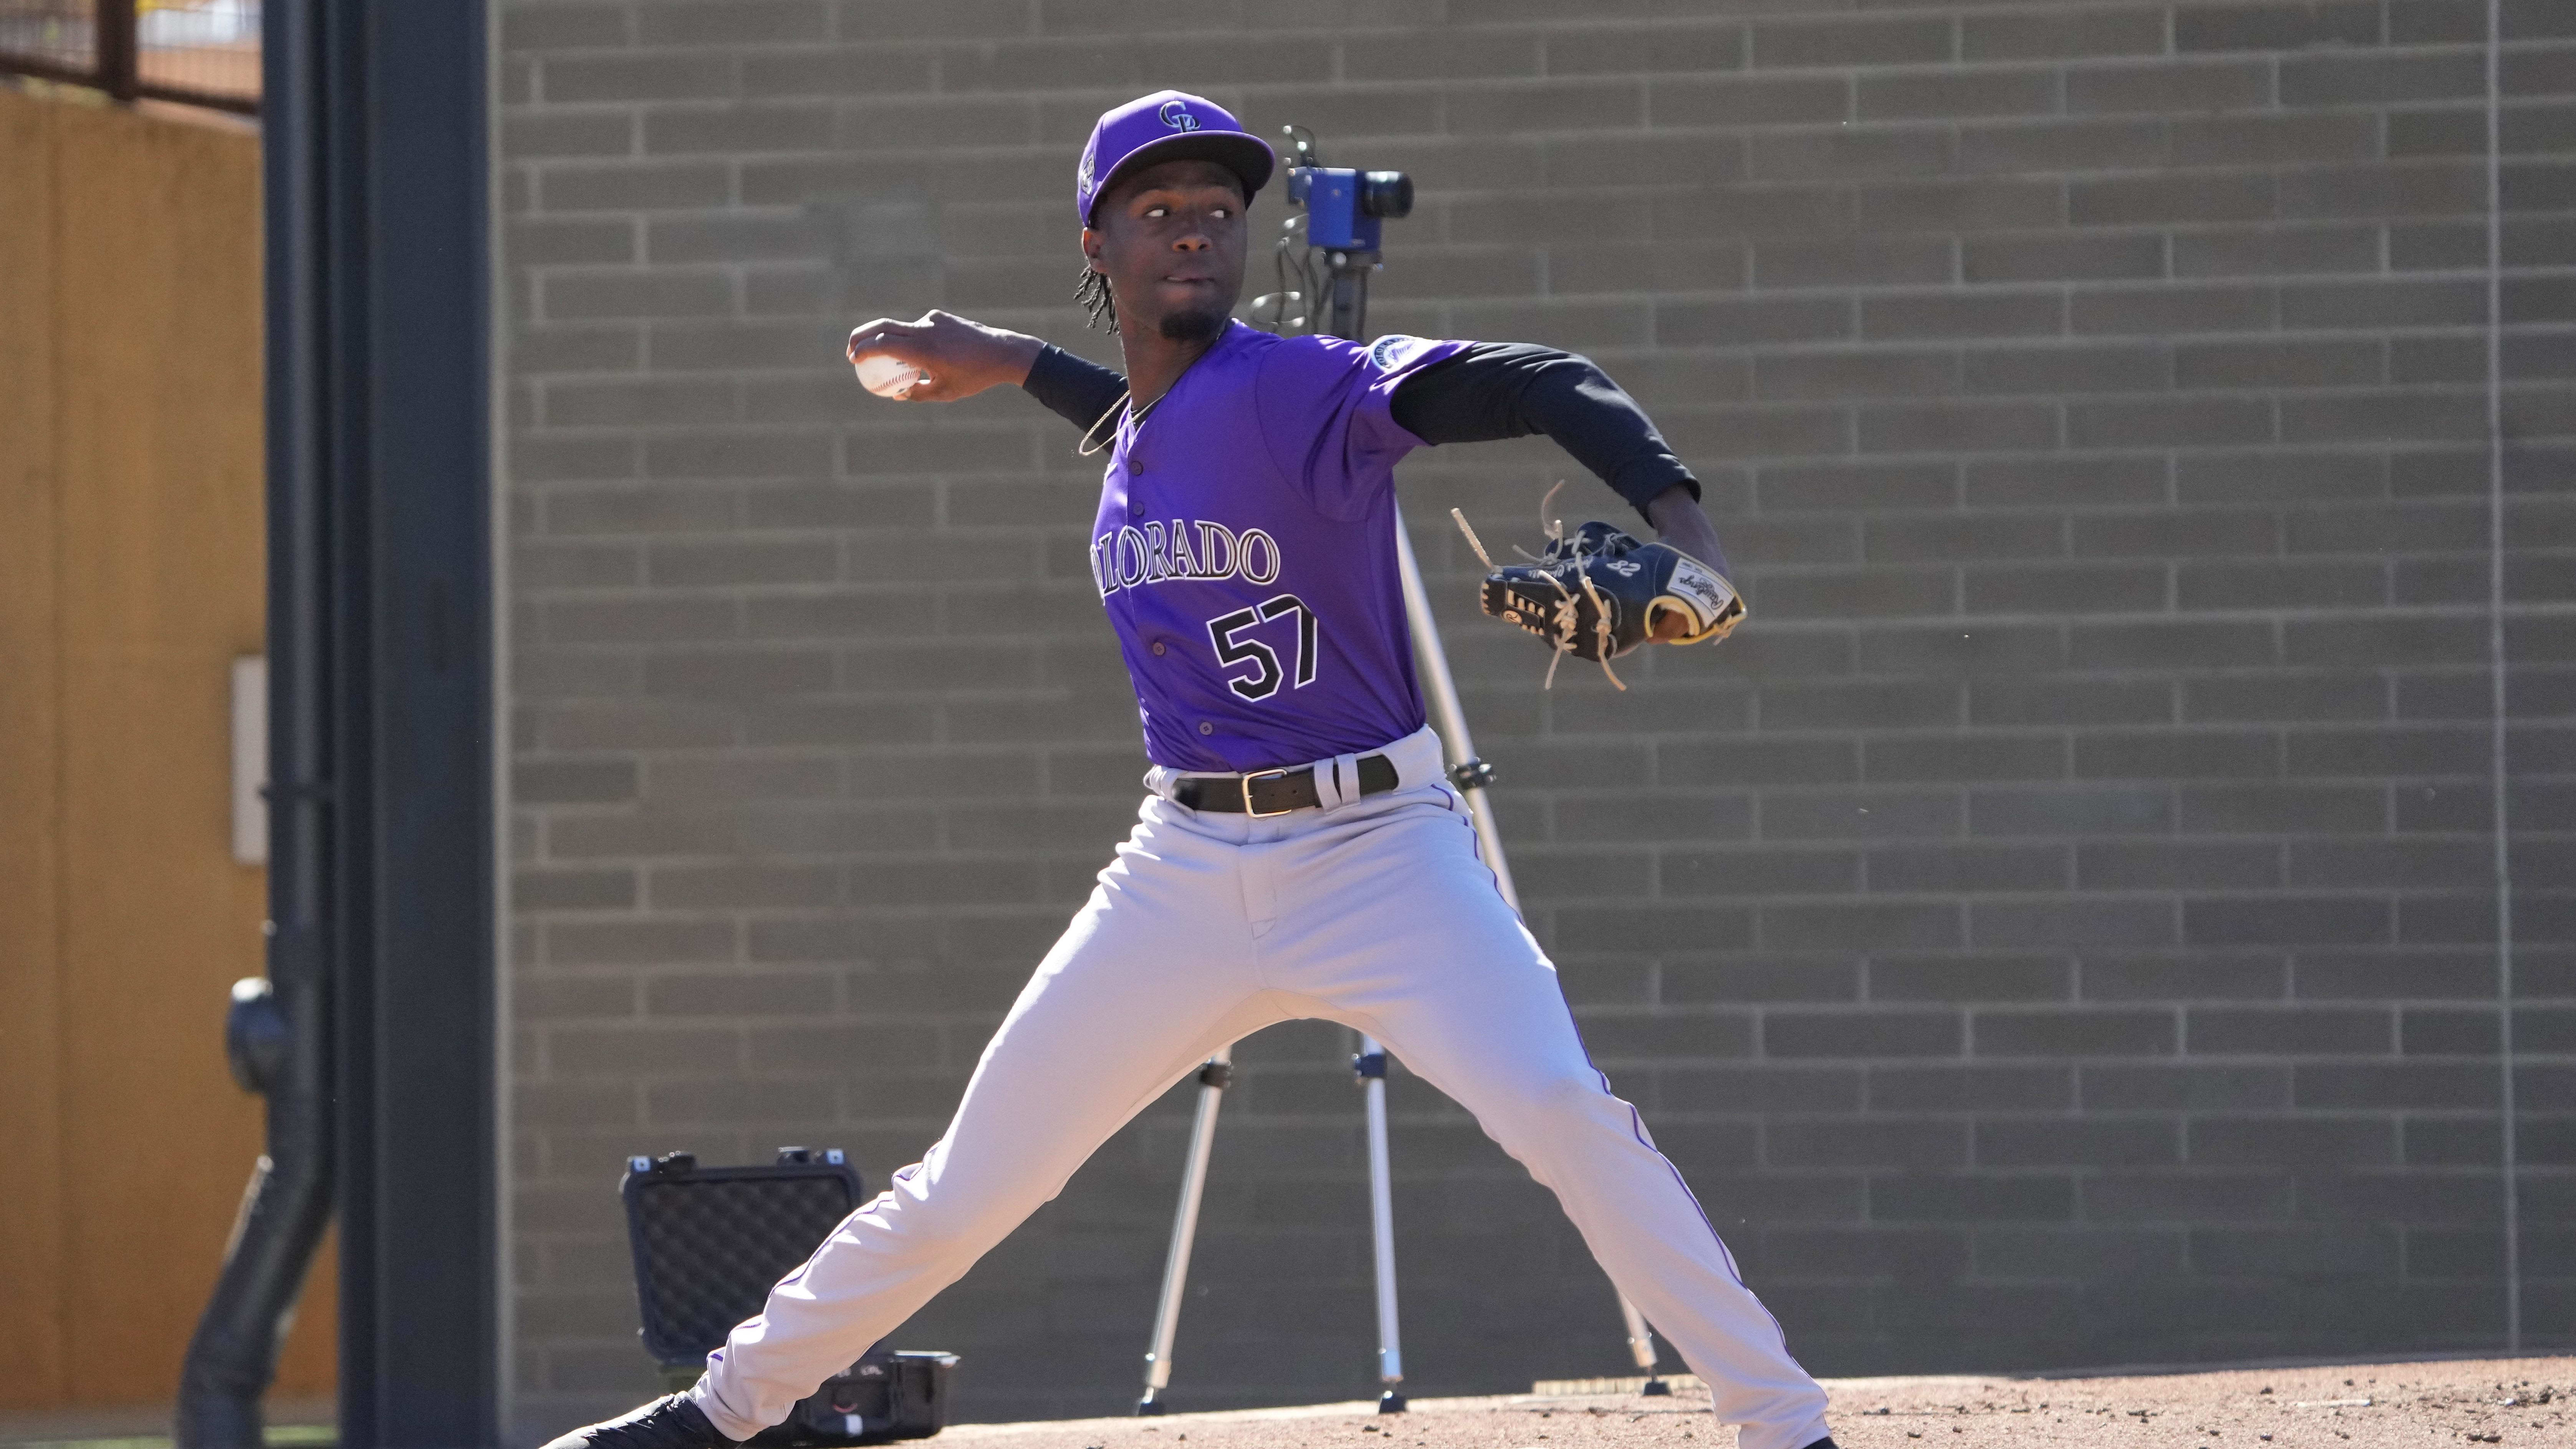 Colorado Rockies Fast Track Angel Chivilli, Call Up Reliever to Make MLB Debut